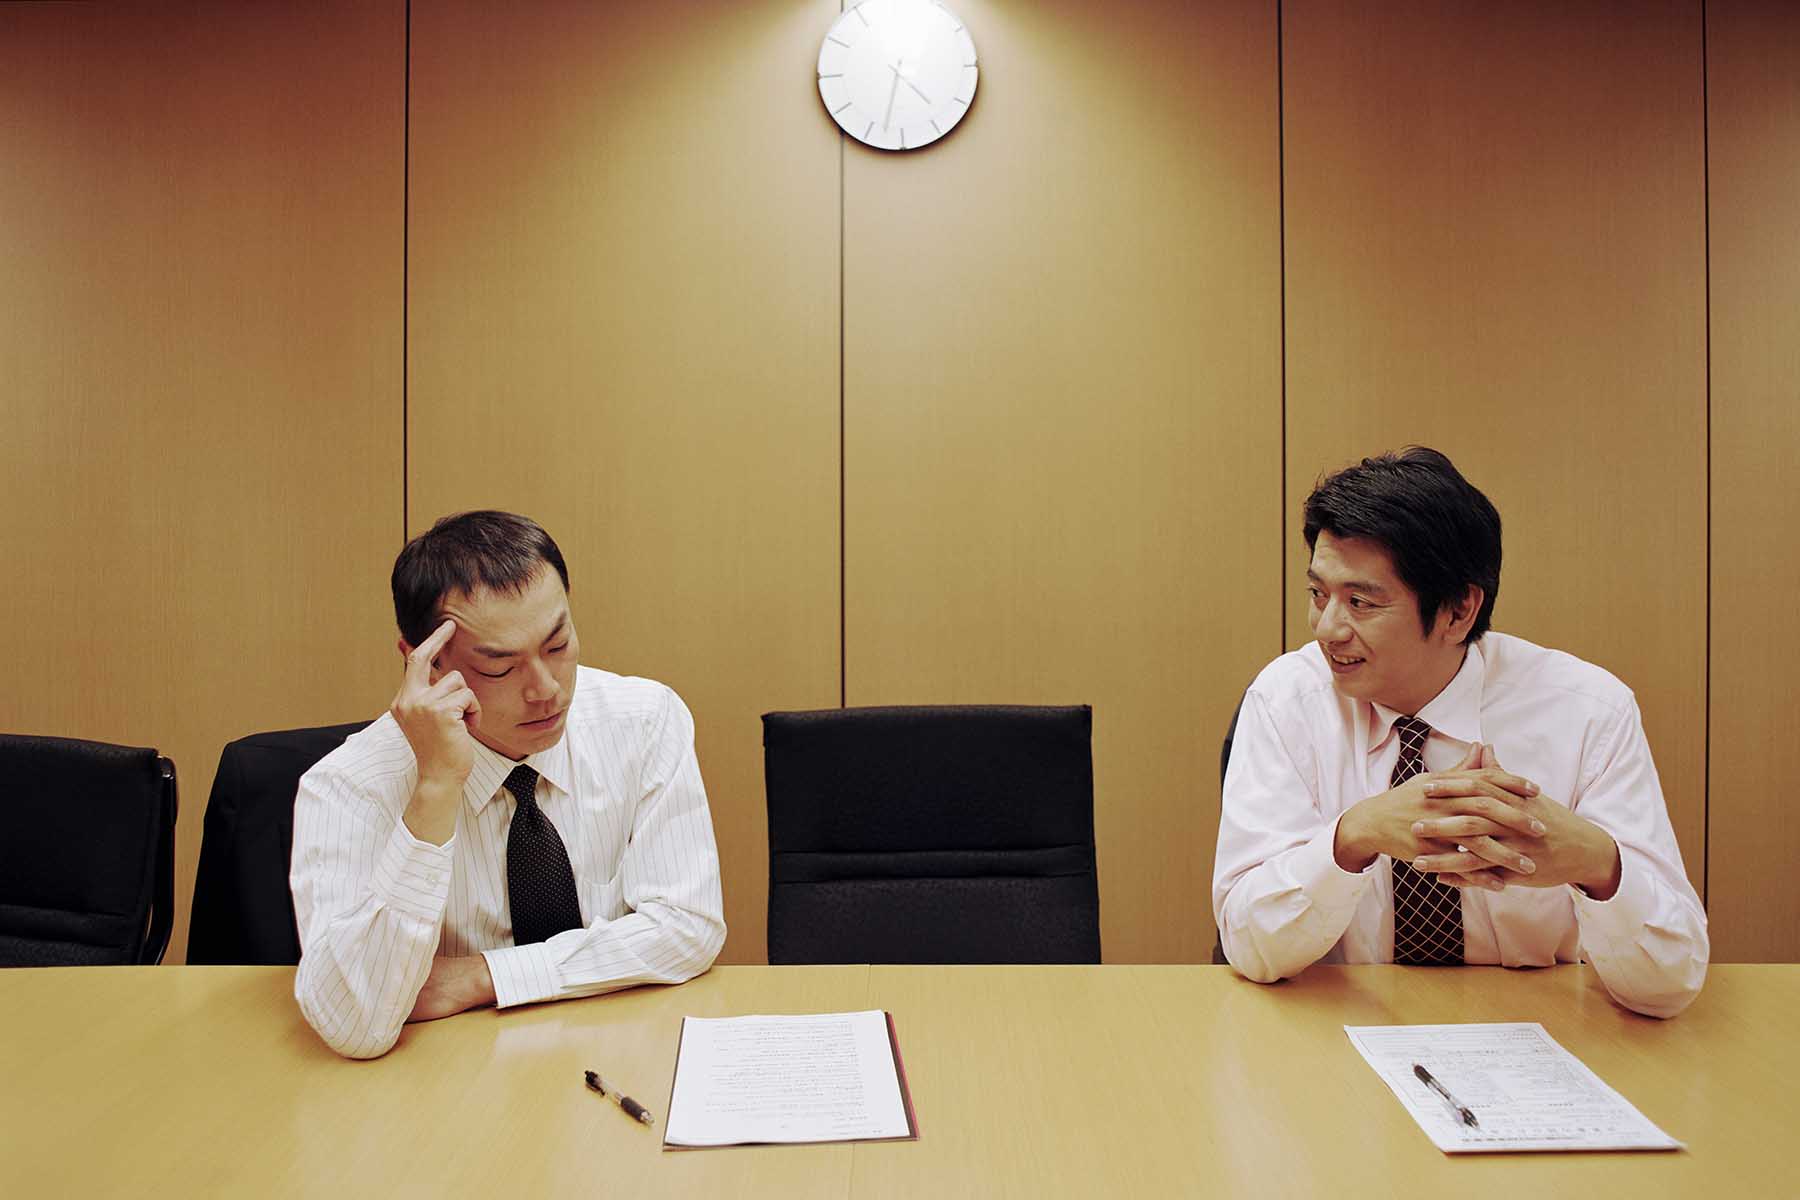 Two men sitting in an office with some very bad light. One is smiling looking at the other person, the other is pensive and looking down at the contract in front of him. 